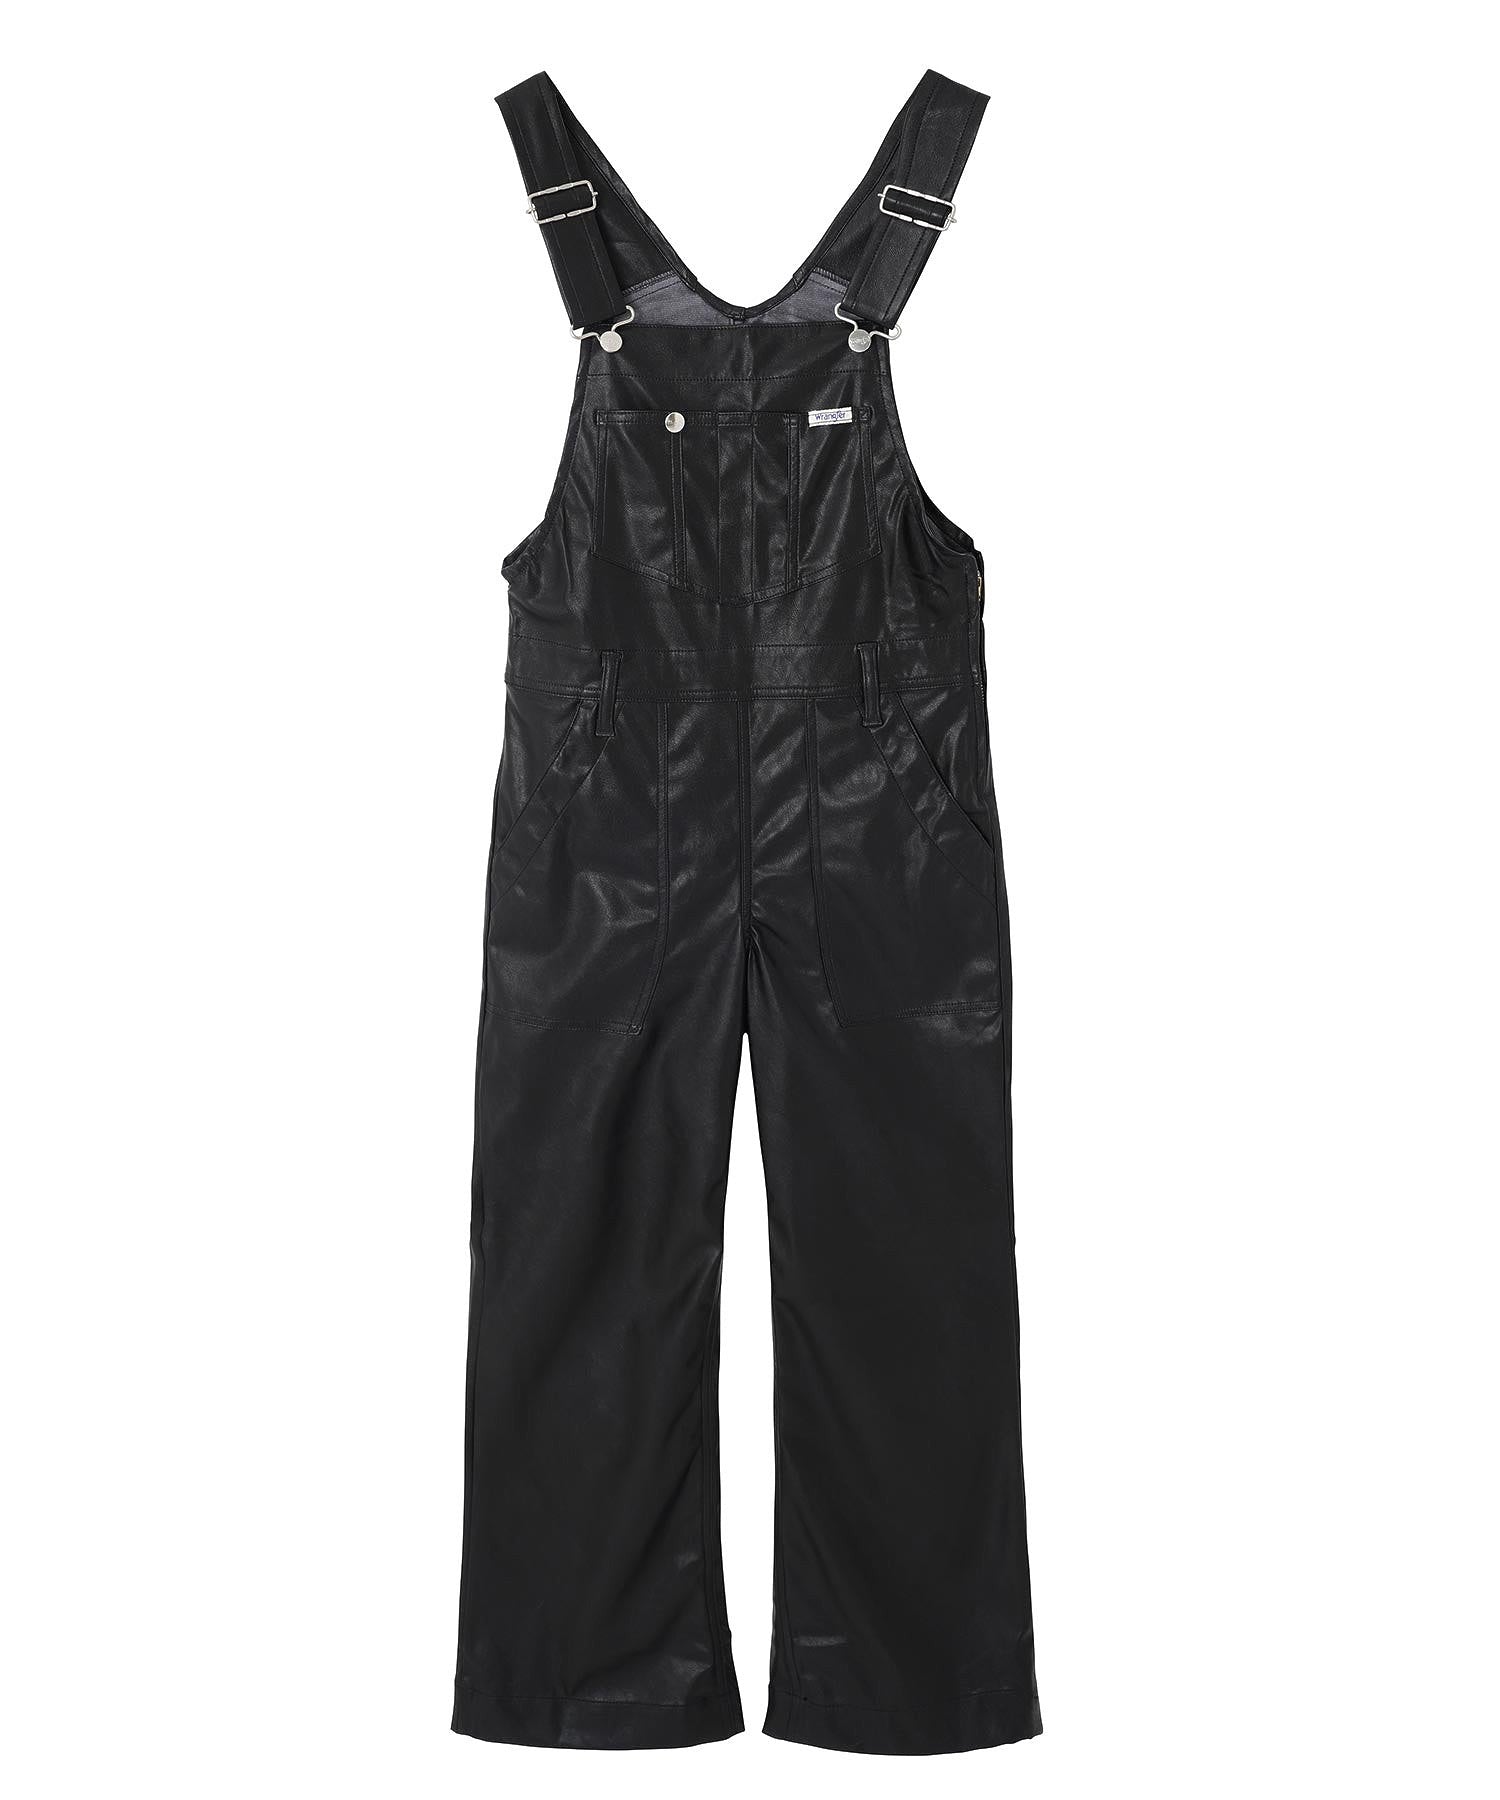 Wrangler /ラングラー Womens SYNTHETIC LEATHER FRARE OVERALL WI1393